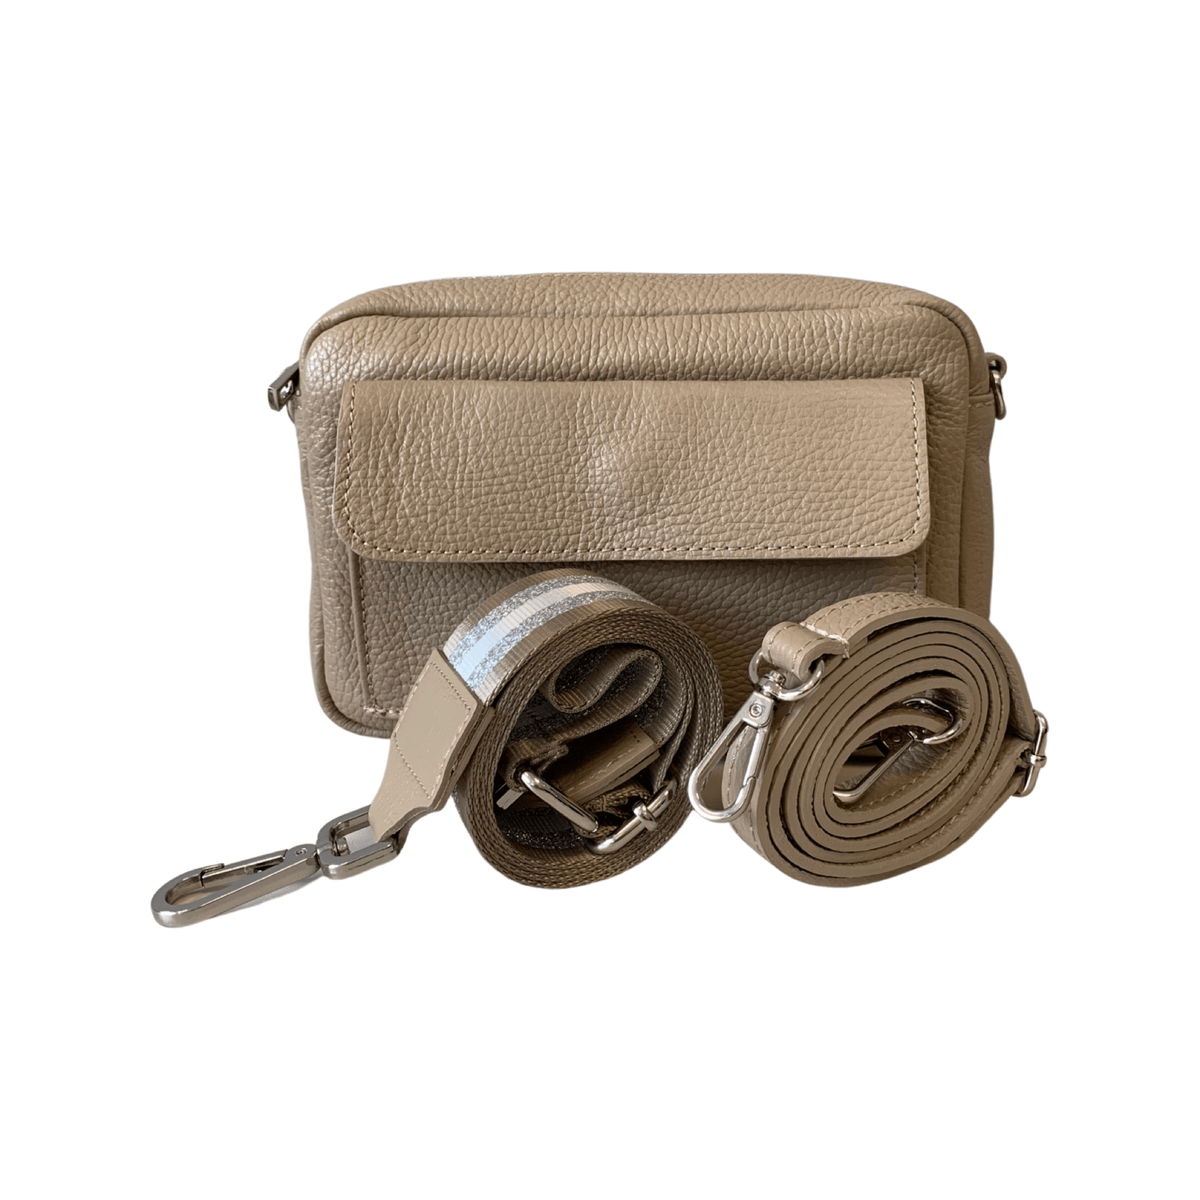 Leather Cross Body Bag in Taupe - Wardrobe Plus